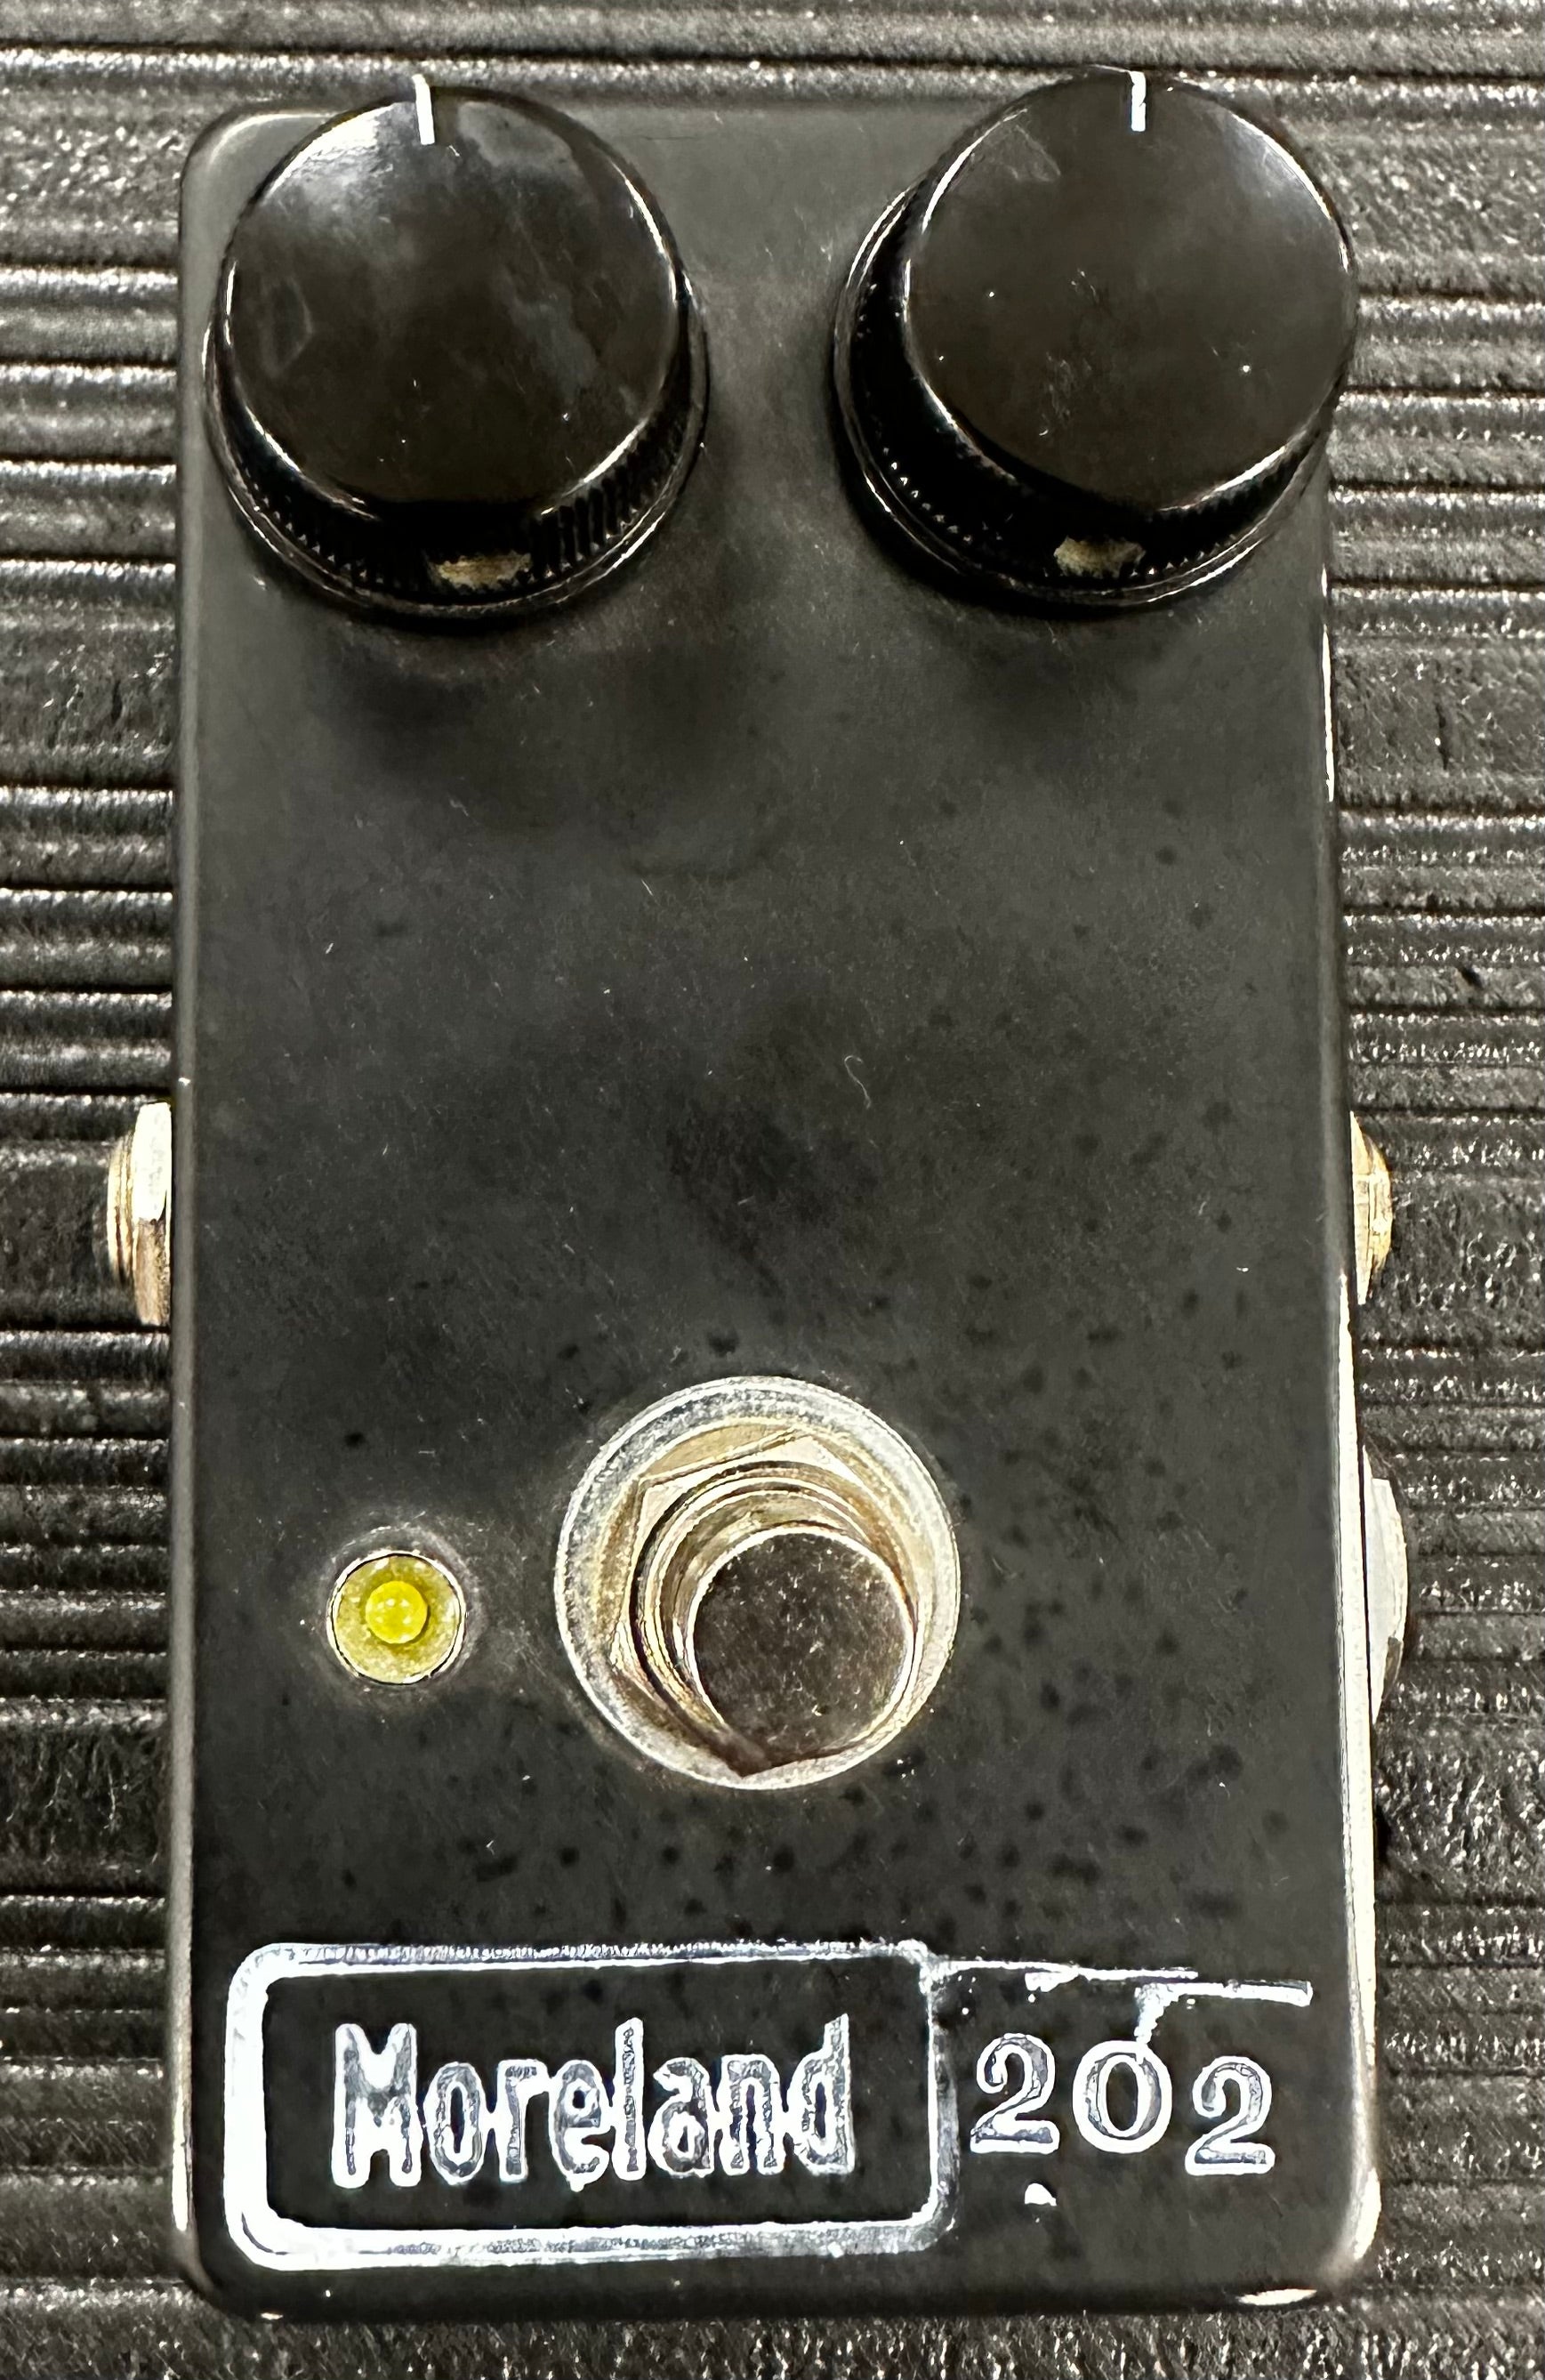 Top down of Used Moreland Magnetics 202 Distortion Pedal #5 of 5 TSS2813.